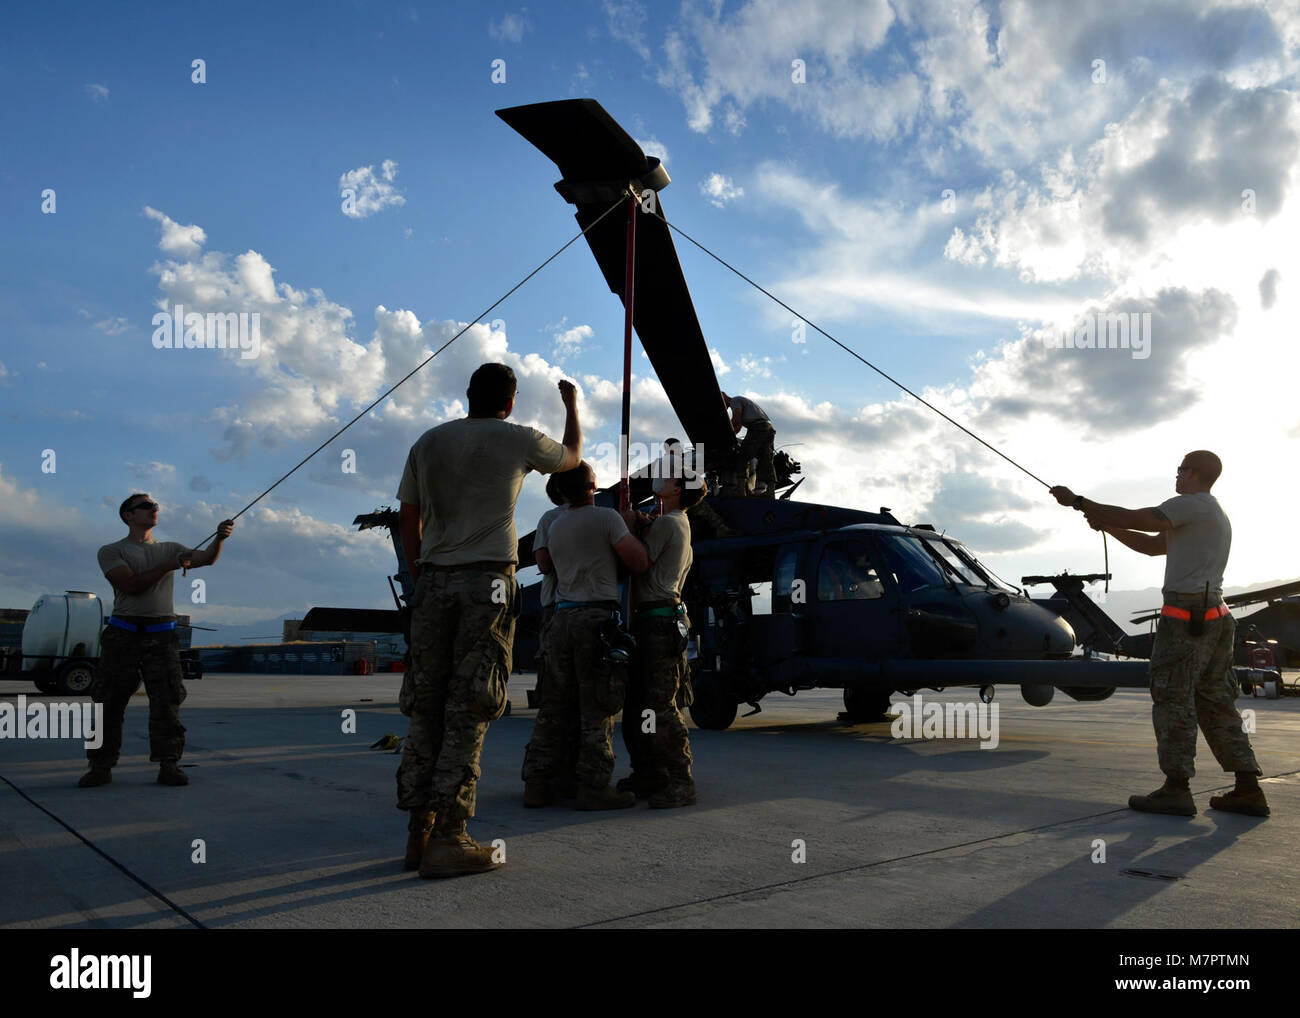 U. S. Air Force Airmen from the 455th Expeditionary Aircraft Maintenance Squadron, break down an HH-60G Pave Hawk helicopter at Bagram Airfield, Afghanistan June 2, 2014.  The unit is preparing the helicopter for redeployment to their home base Moody Air Force Base, Ga.  Helicopter maintainers here ensure Bagram’s combat search and rescue helicopters are ready to fly at a moment’s notice. (U.S. Air Force photo by Staff Sgt. Evelyn Chavez/Released) 455th Air Expeditionary Wing Bagram Airfield, Afghanistan Stock Photo